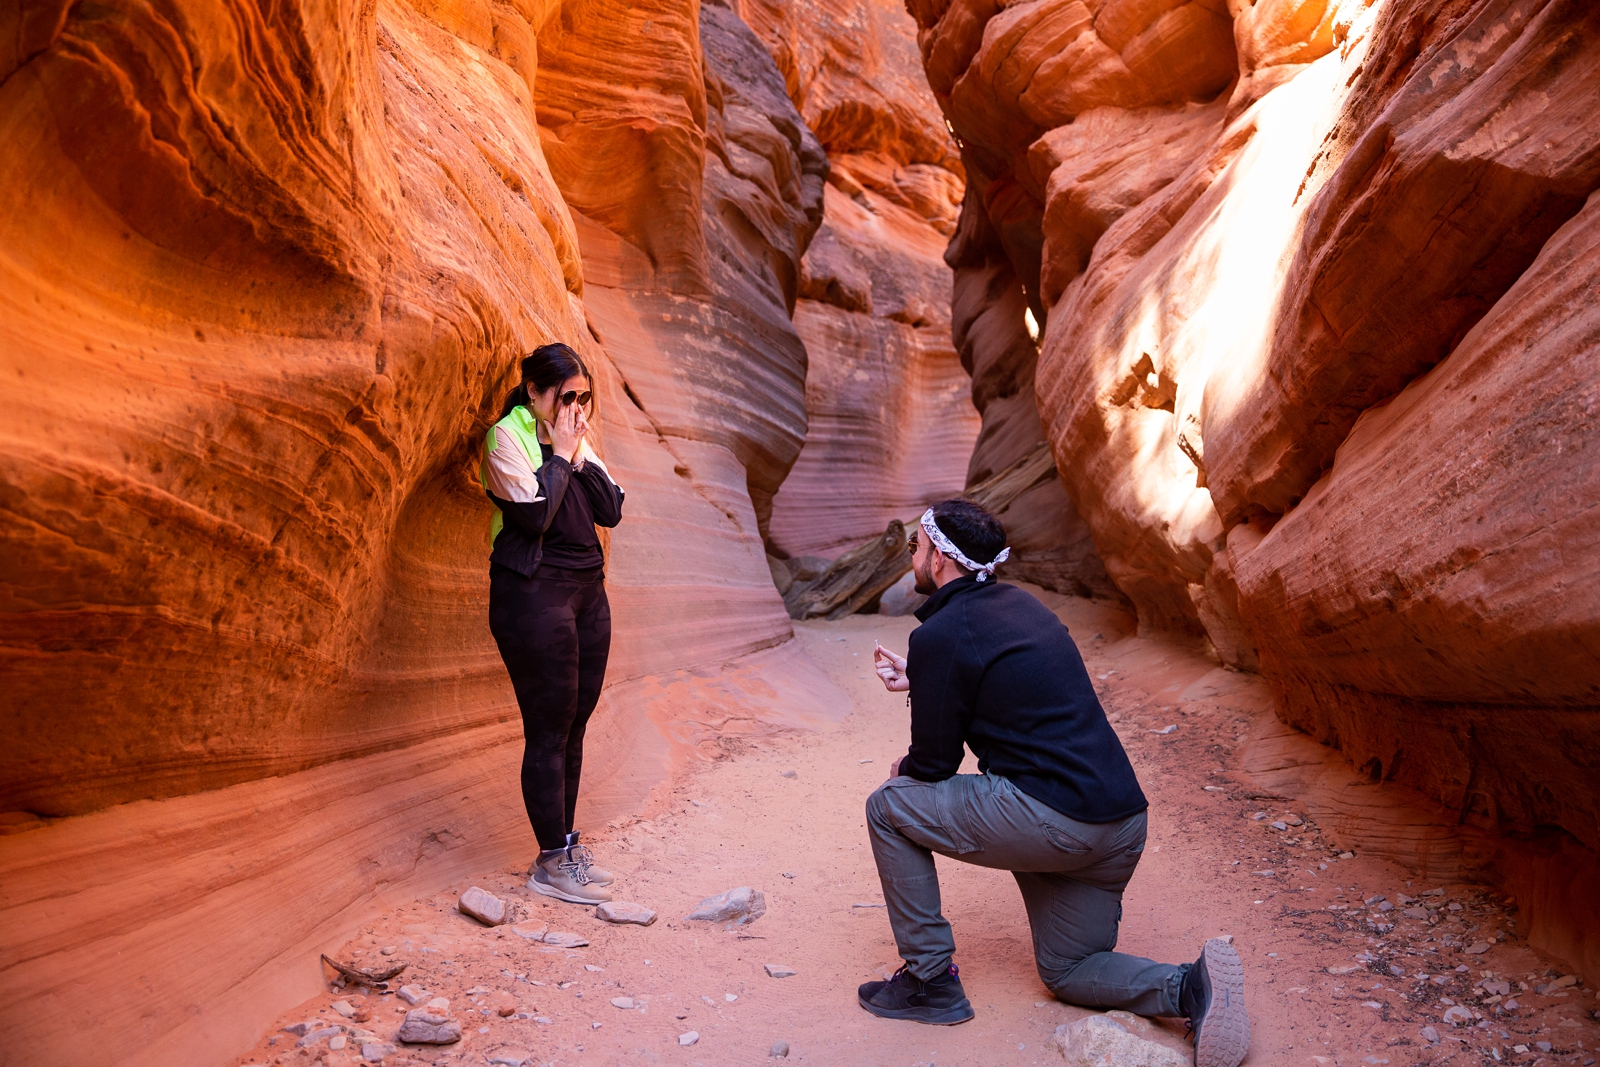 A guy down on his knee proposing to his shocked and surprised girlfriend in the middle of the Utah slot canyon during their adventurous hike